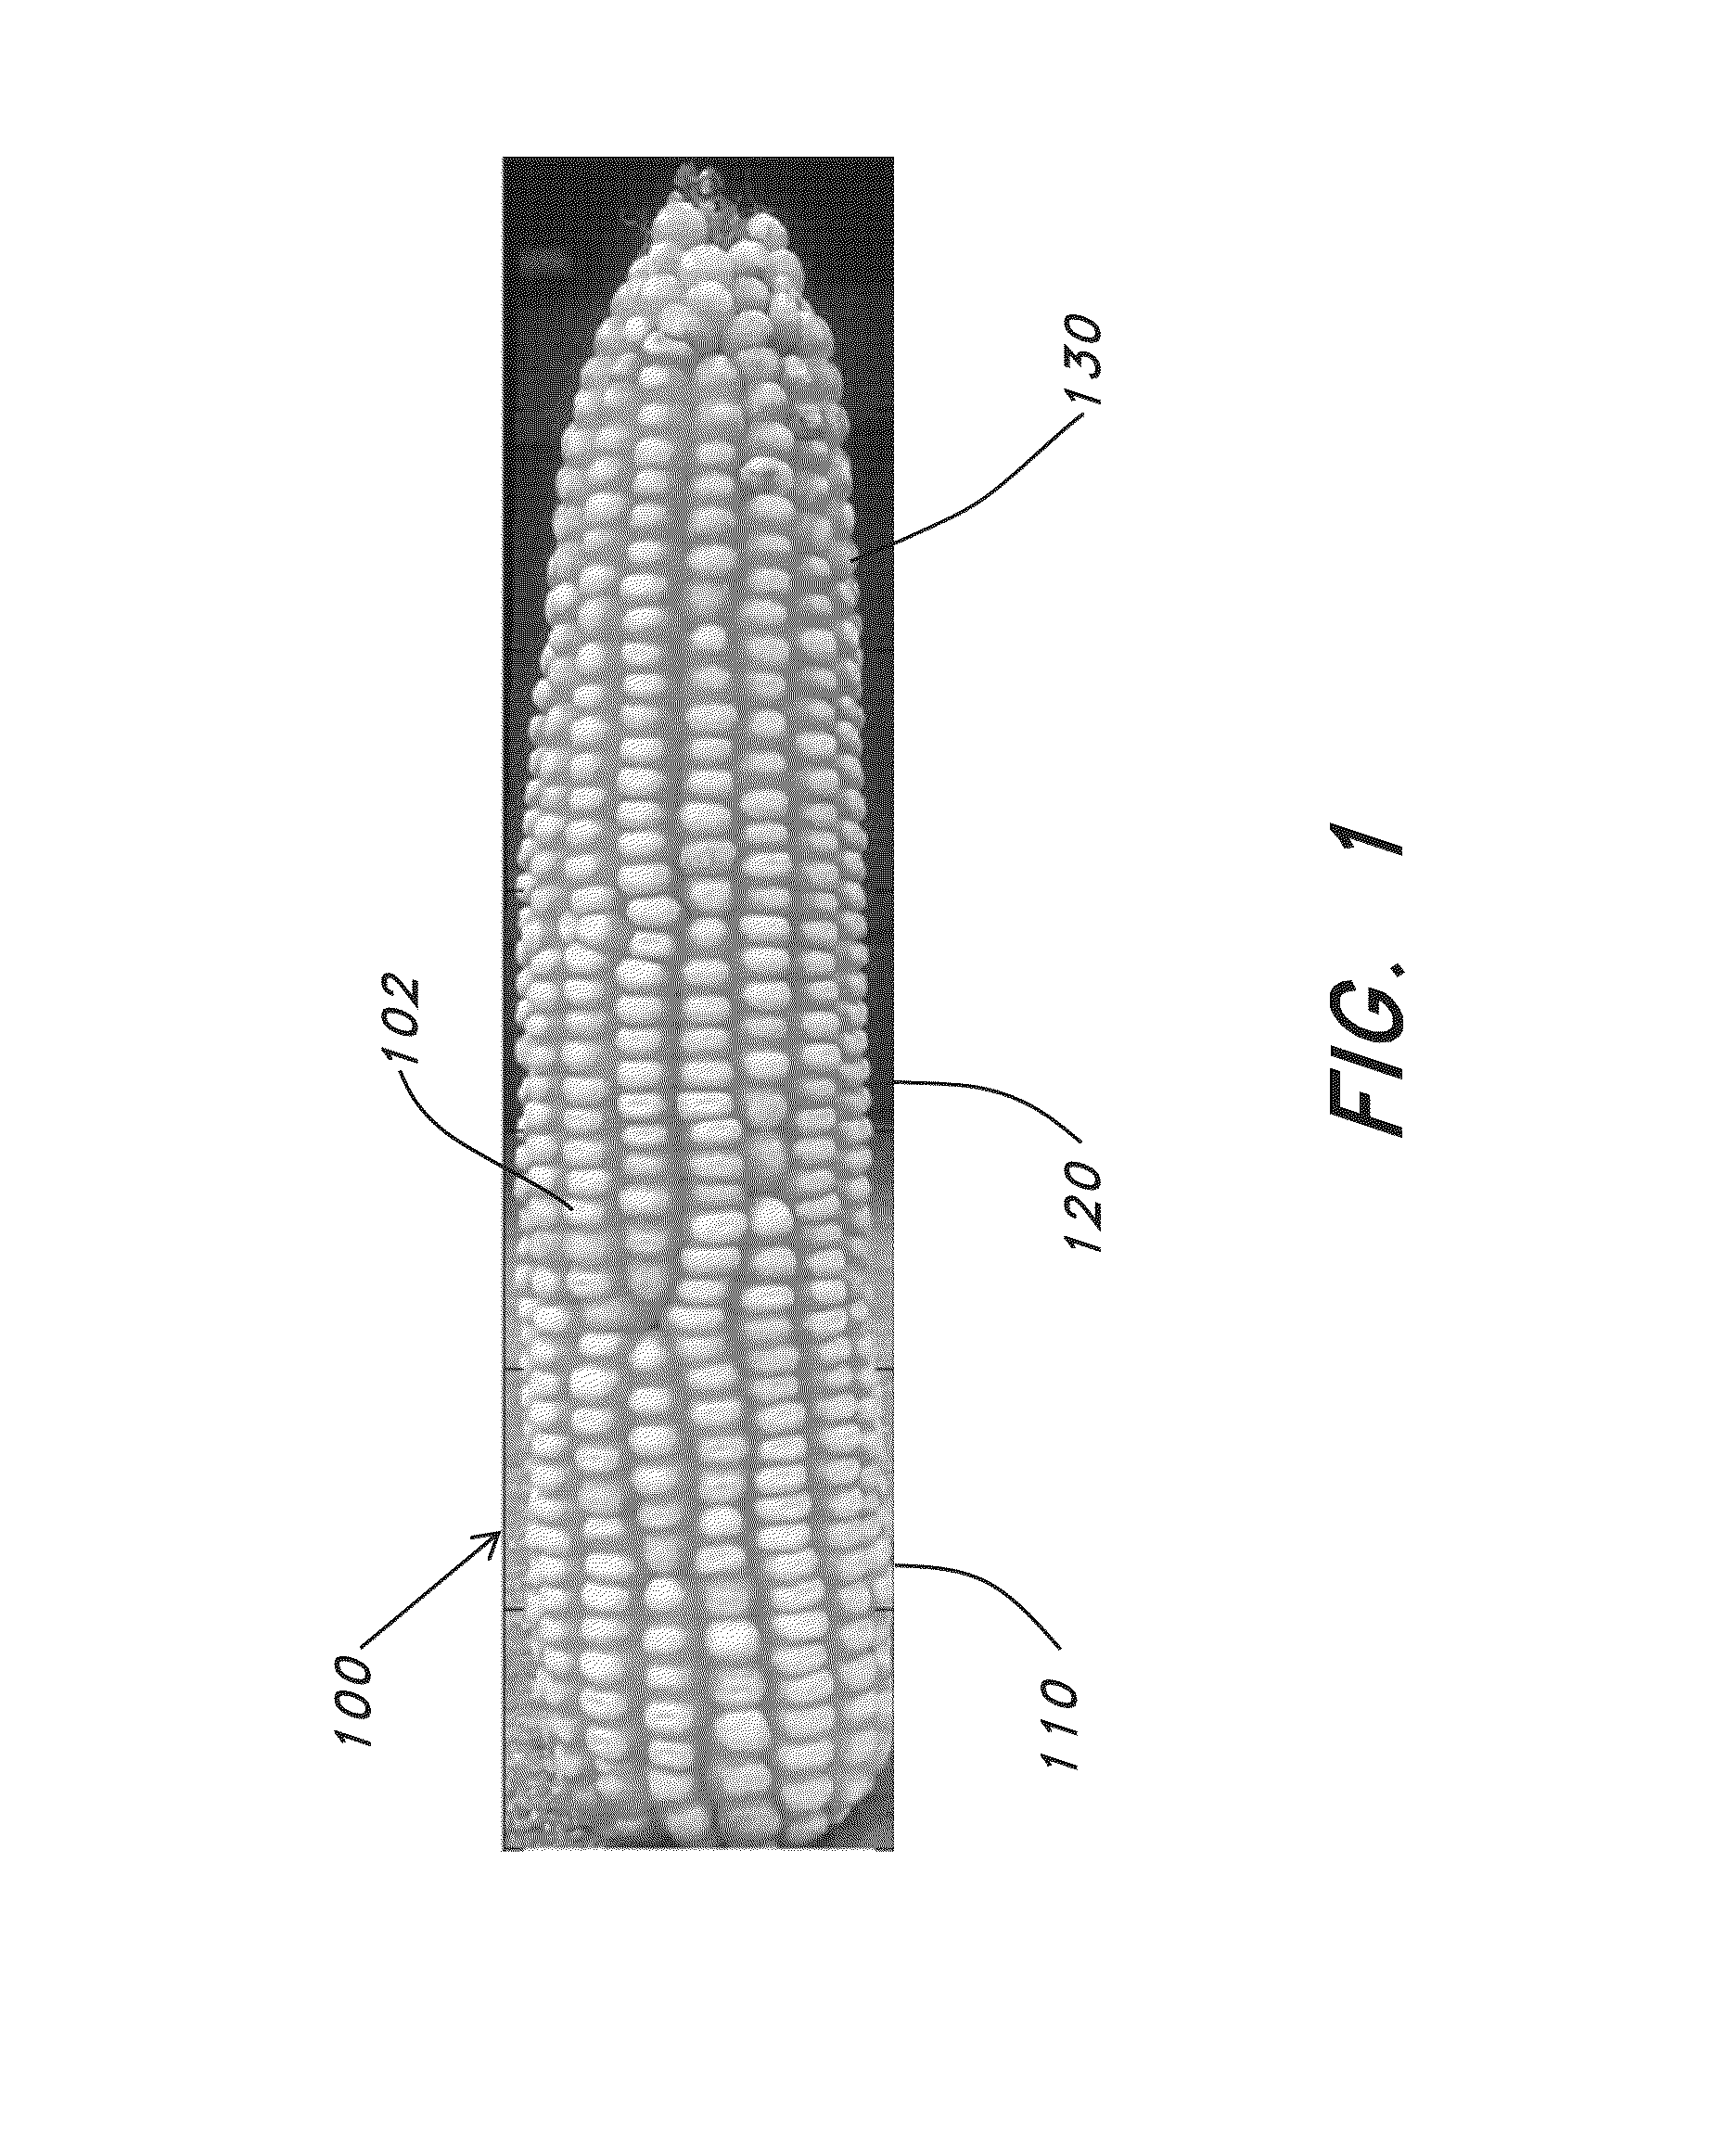 Apparatus and processes for classifying and counting corn kernels